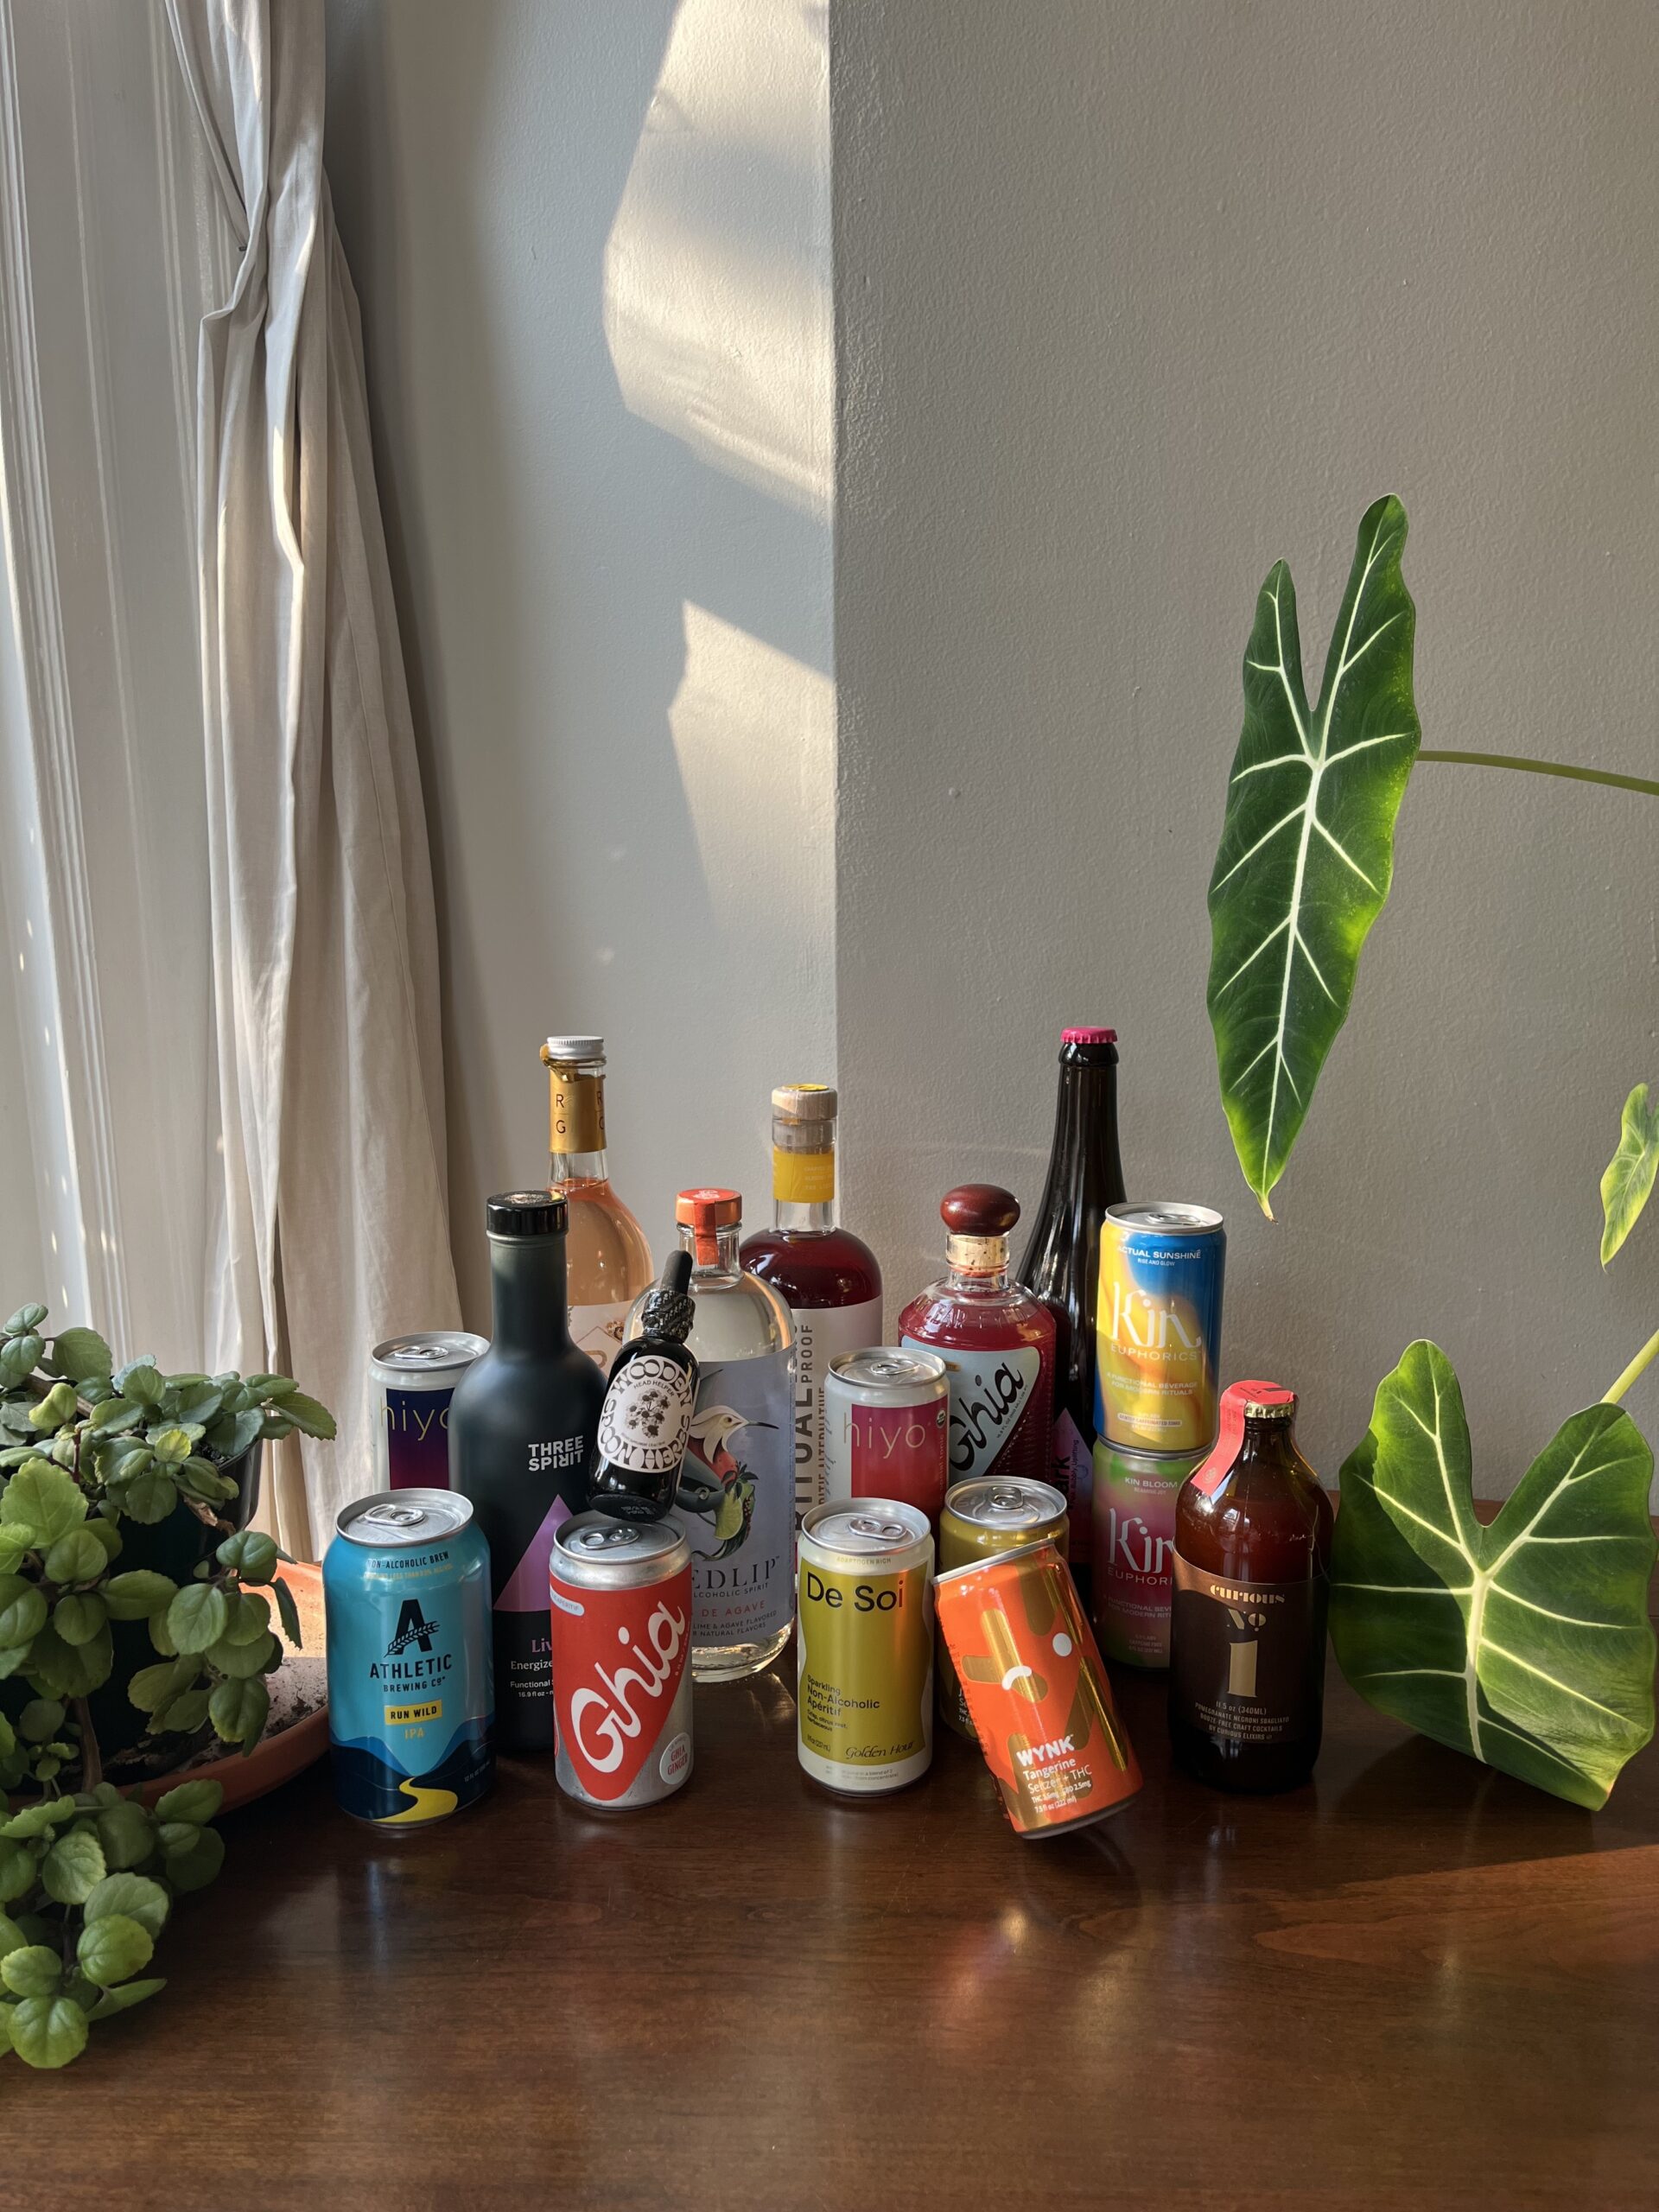 A collection of various beverages, including bottles and cans, displayed on a wooden surface with plants and a window in the background.